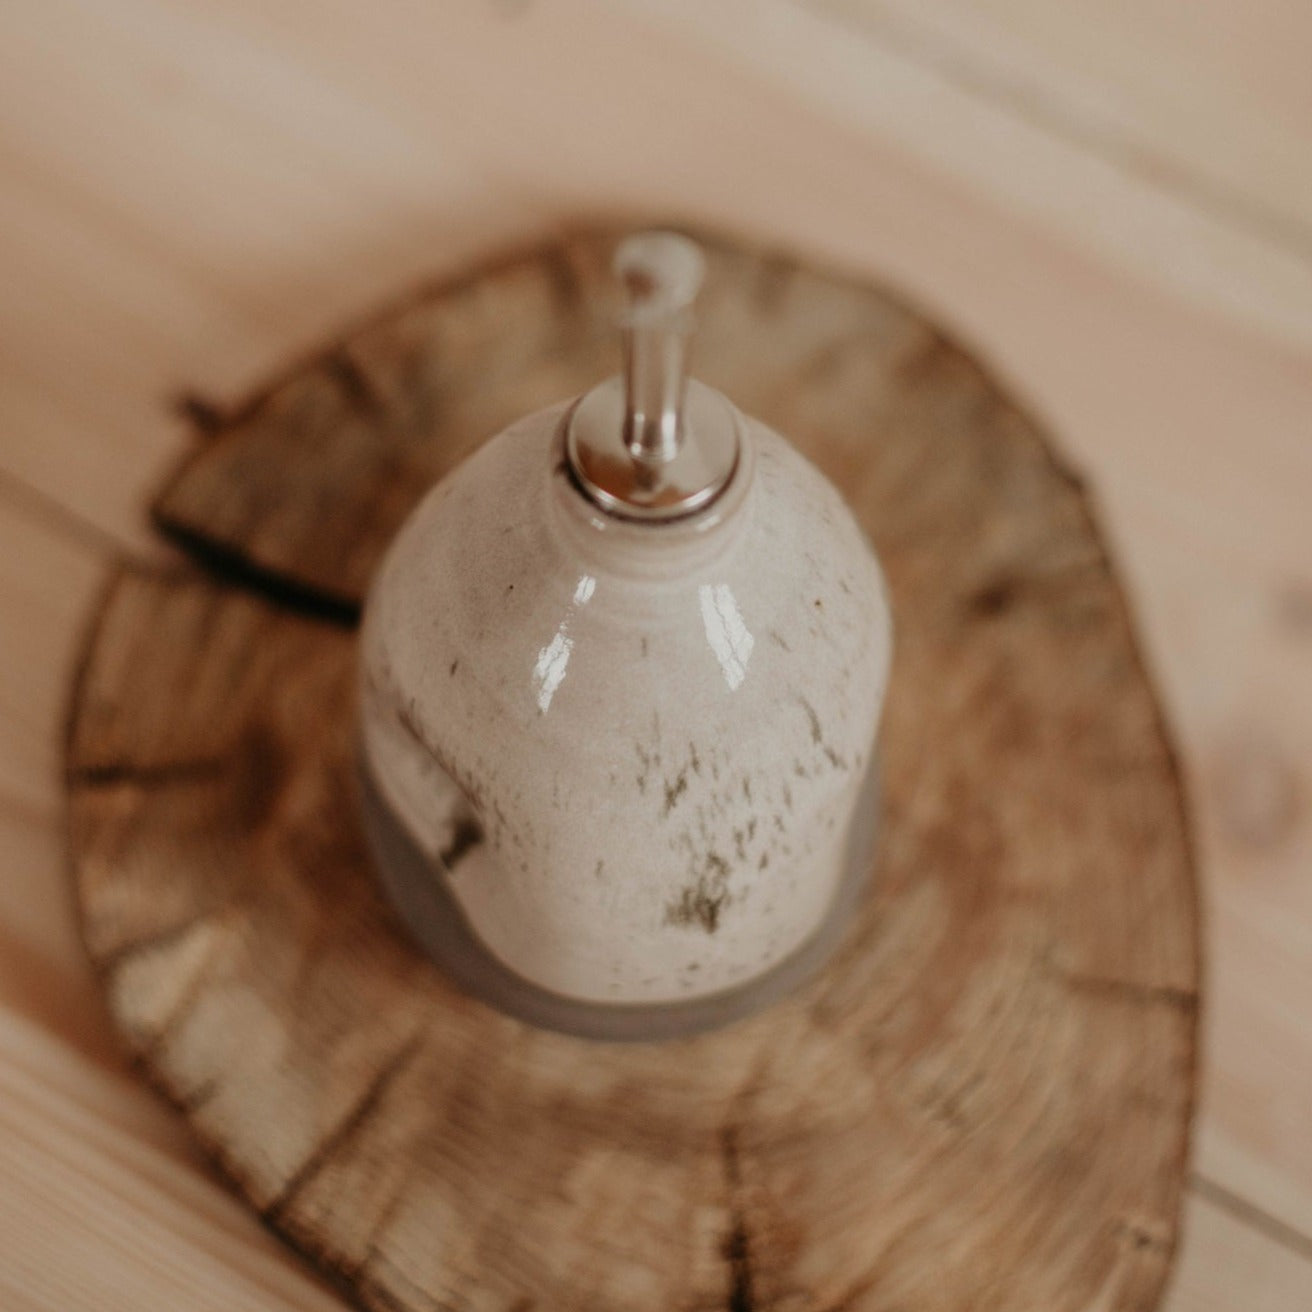 Enhance your kitchen décor with this handcrafted oil bottle